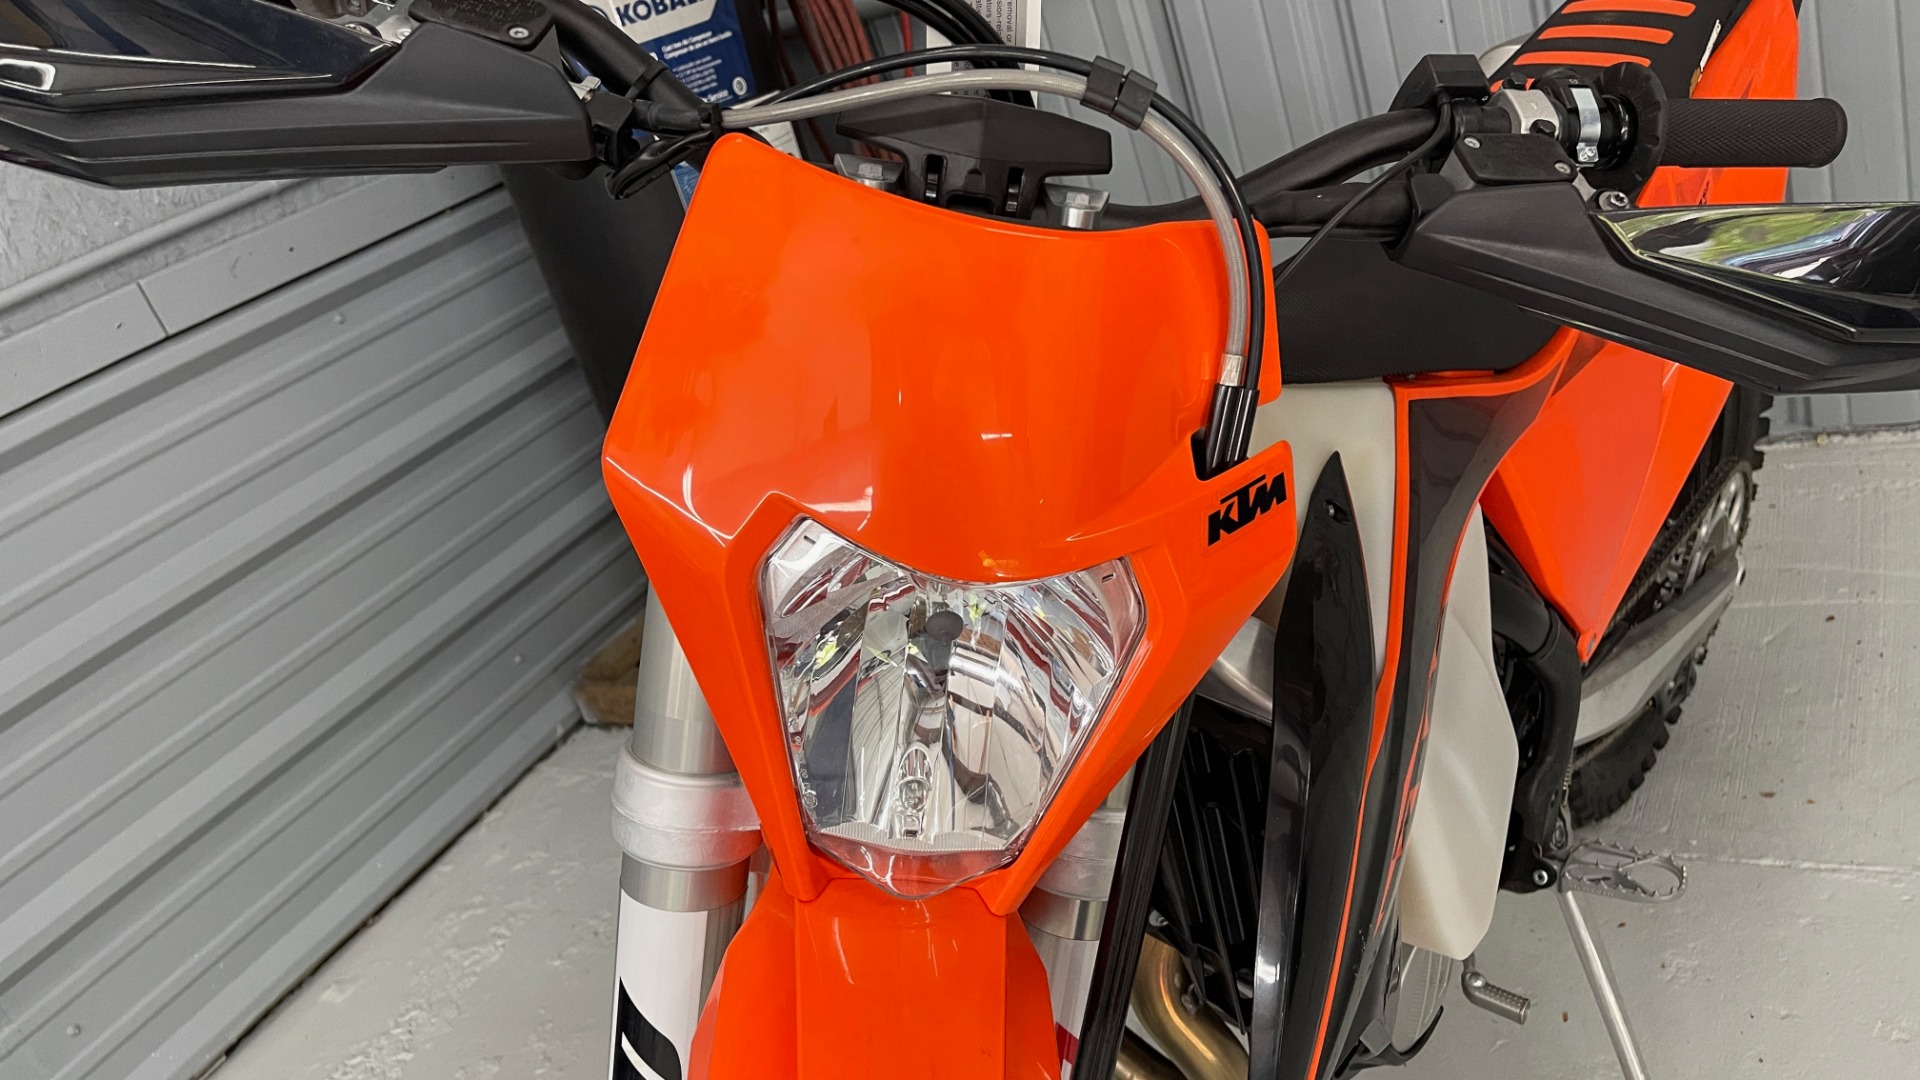 Used 2020 KTM 500 XCF-W ENDURO / 4-STROKE / EFI / ELECTRIC START / 6-SPEED for sale $11,000 at Formula Imports in Charlotte NC 28227 4